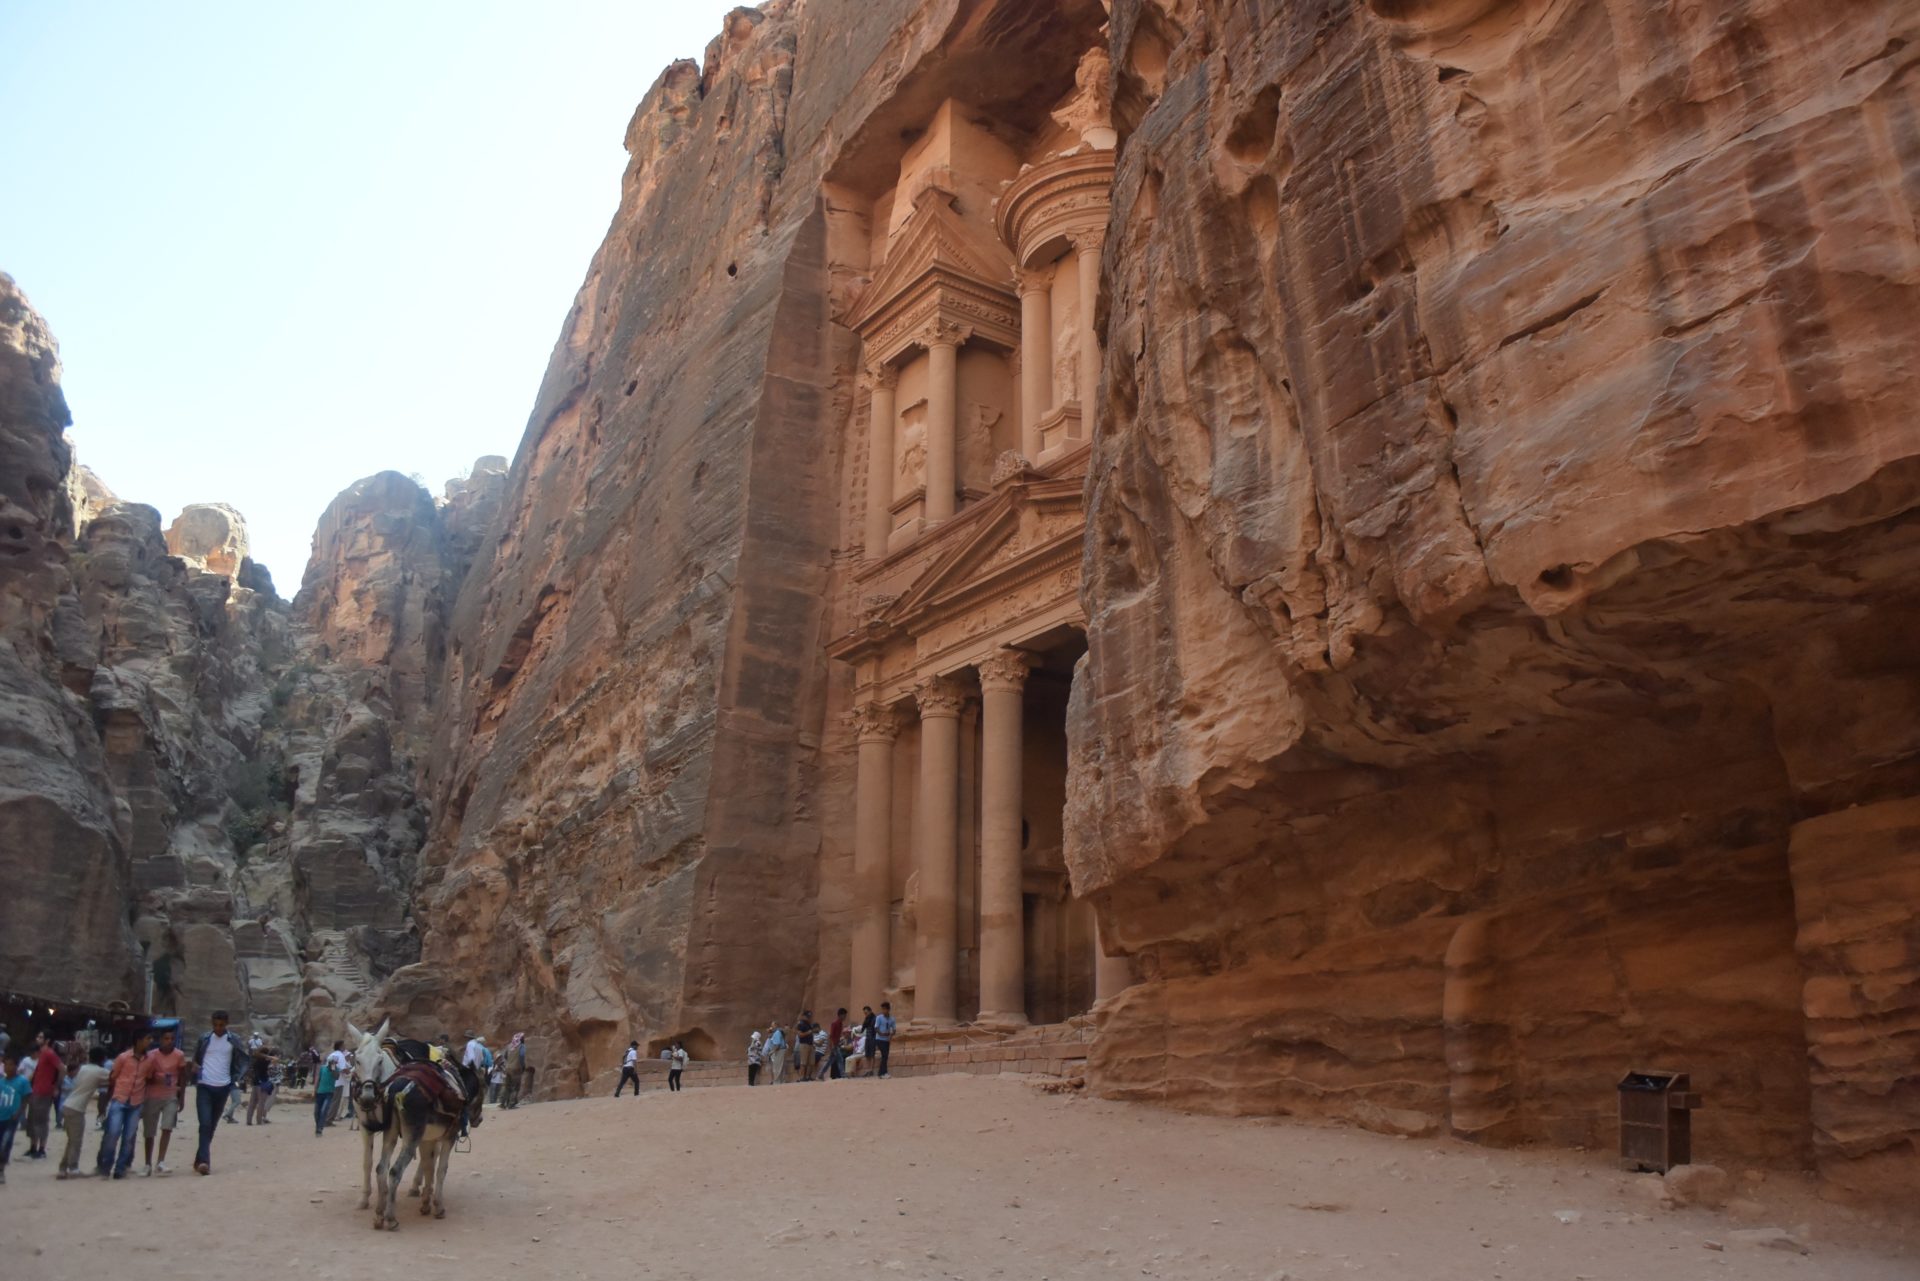 people walking in front of a rock cliff with Petra in the background